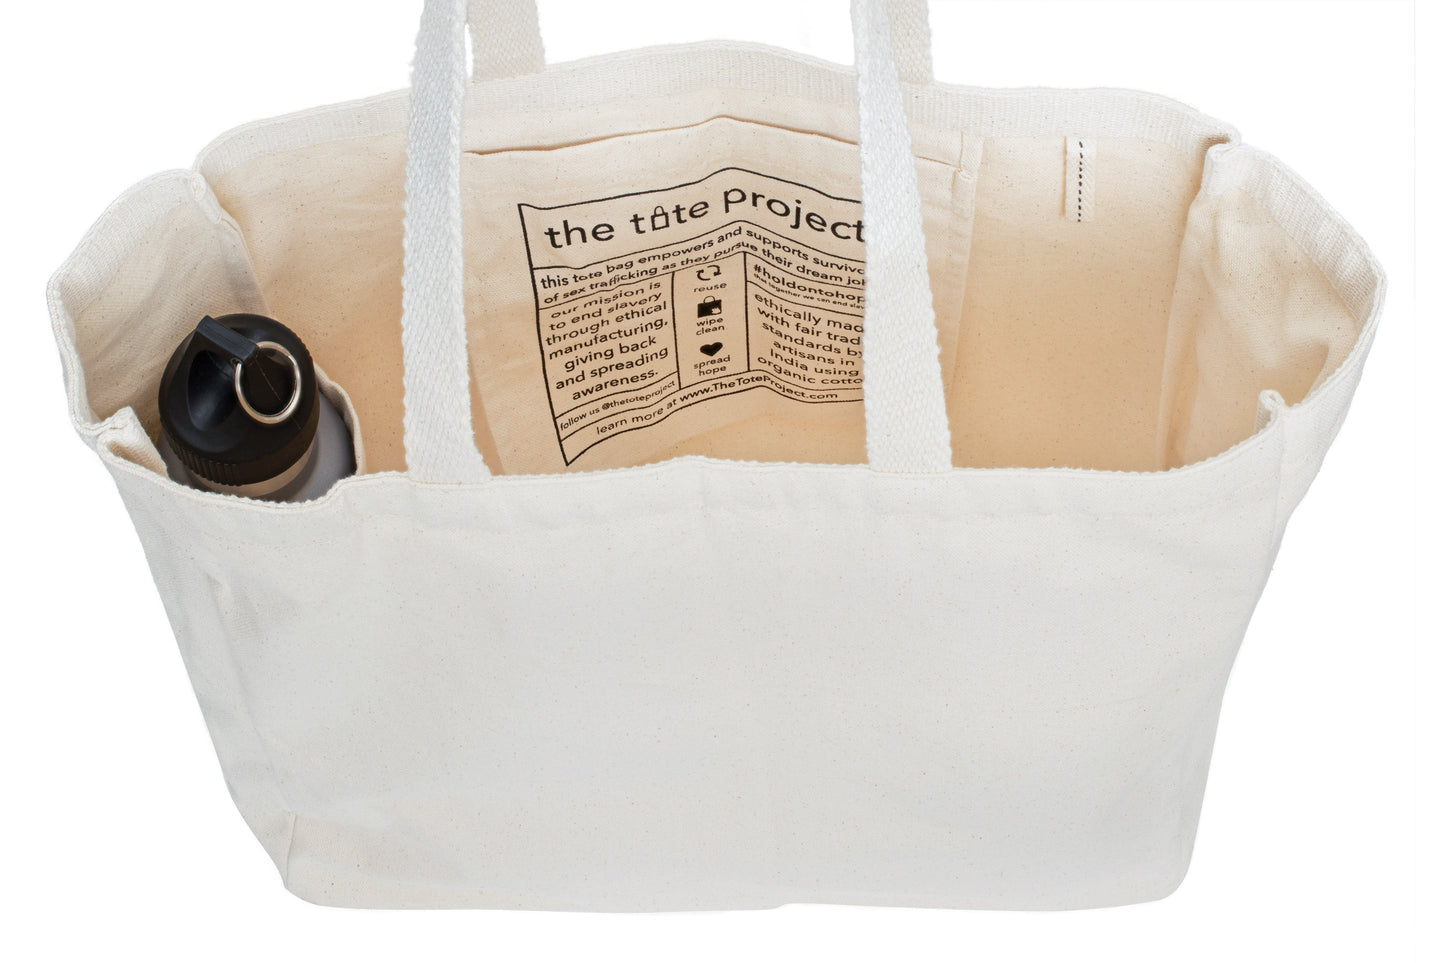 Free to Be | Tote